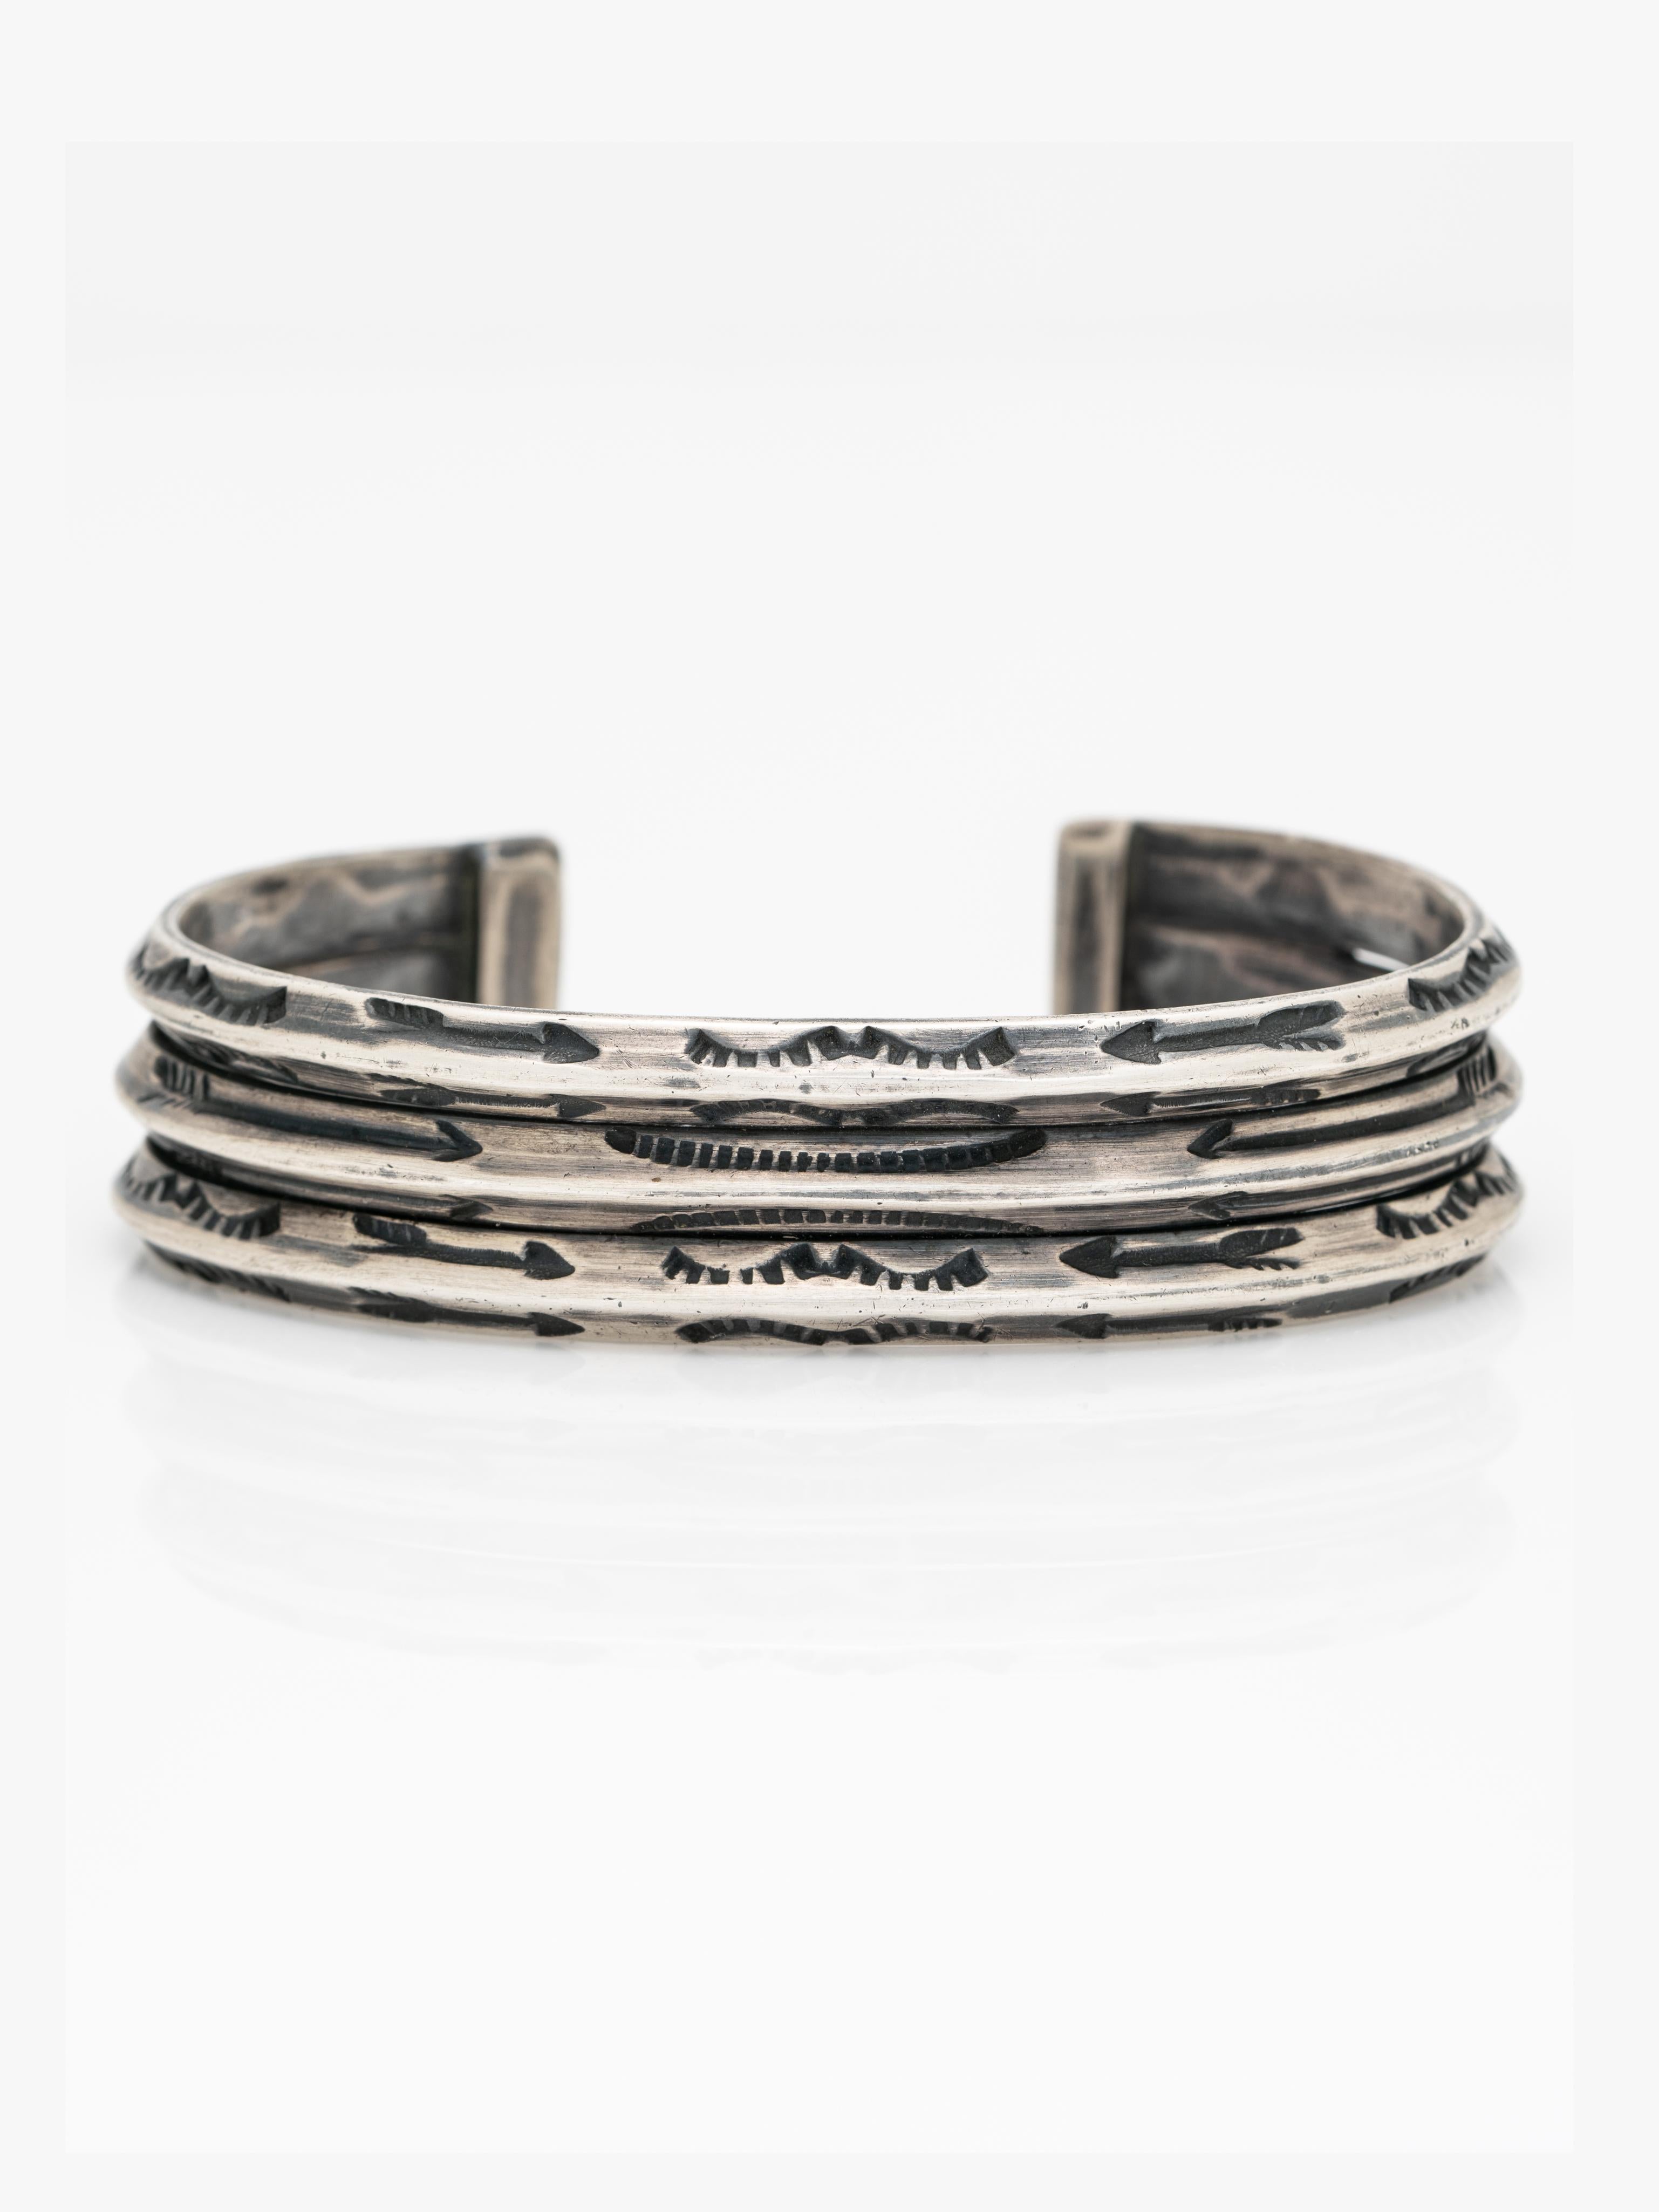 Vintage Native American Navajo Sterling Hand Engraved Arrows Bracelet Cuff c.1950s

Hand engraved and hand forged and heavy. A wonderful vintage Navajo cuff!

Please note that the picture of the cuff on is a bit too large for my tiny wrists - this